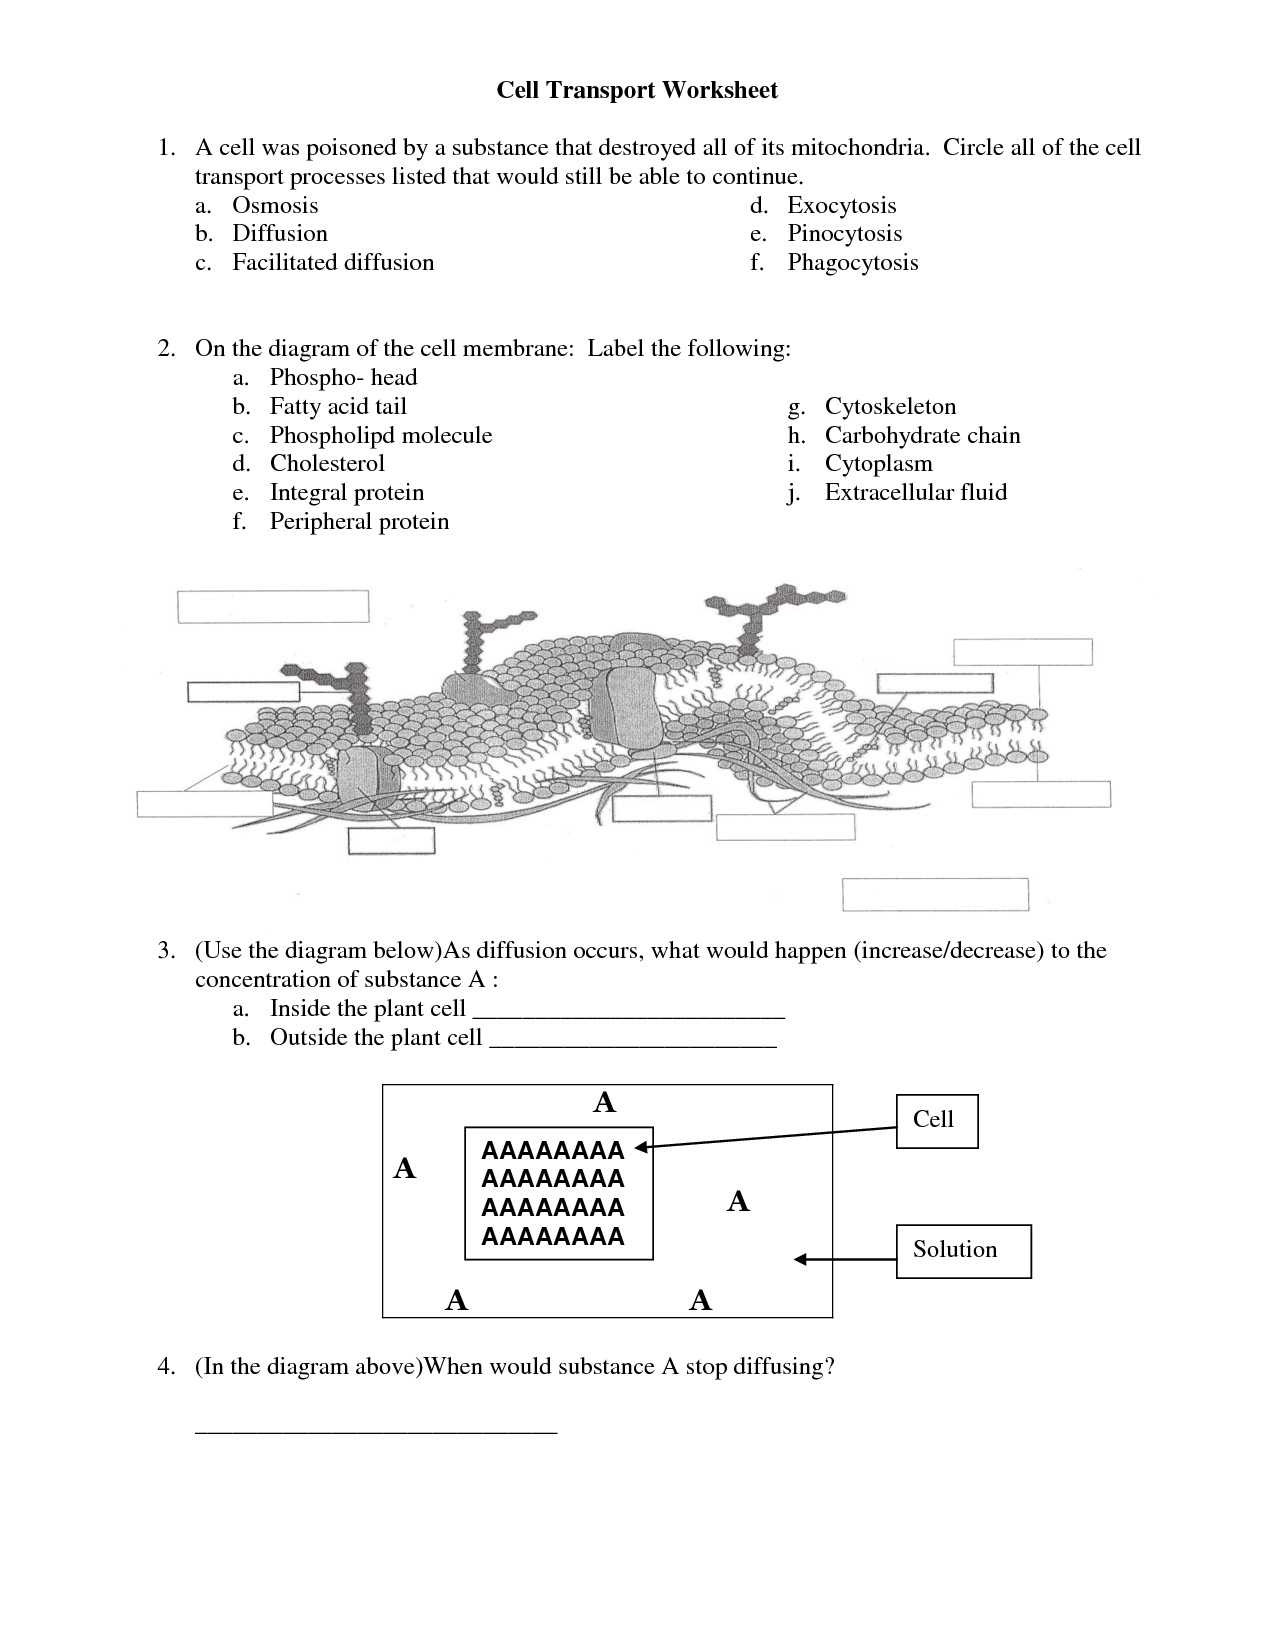 Cells and organelles Worksheet together with Cell Membrane Worksheet Answers Awesome 16 Best Cell Membrane